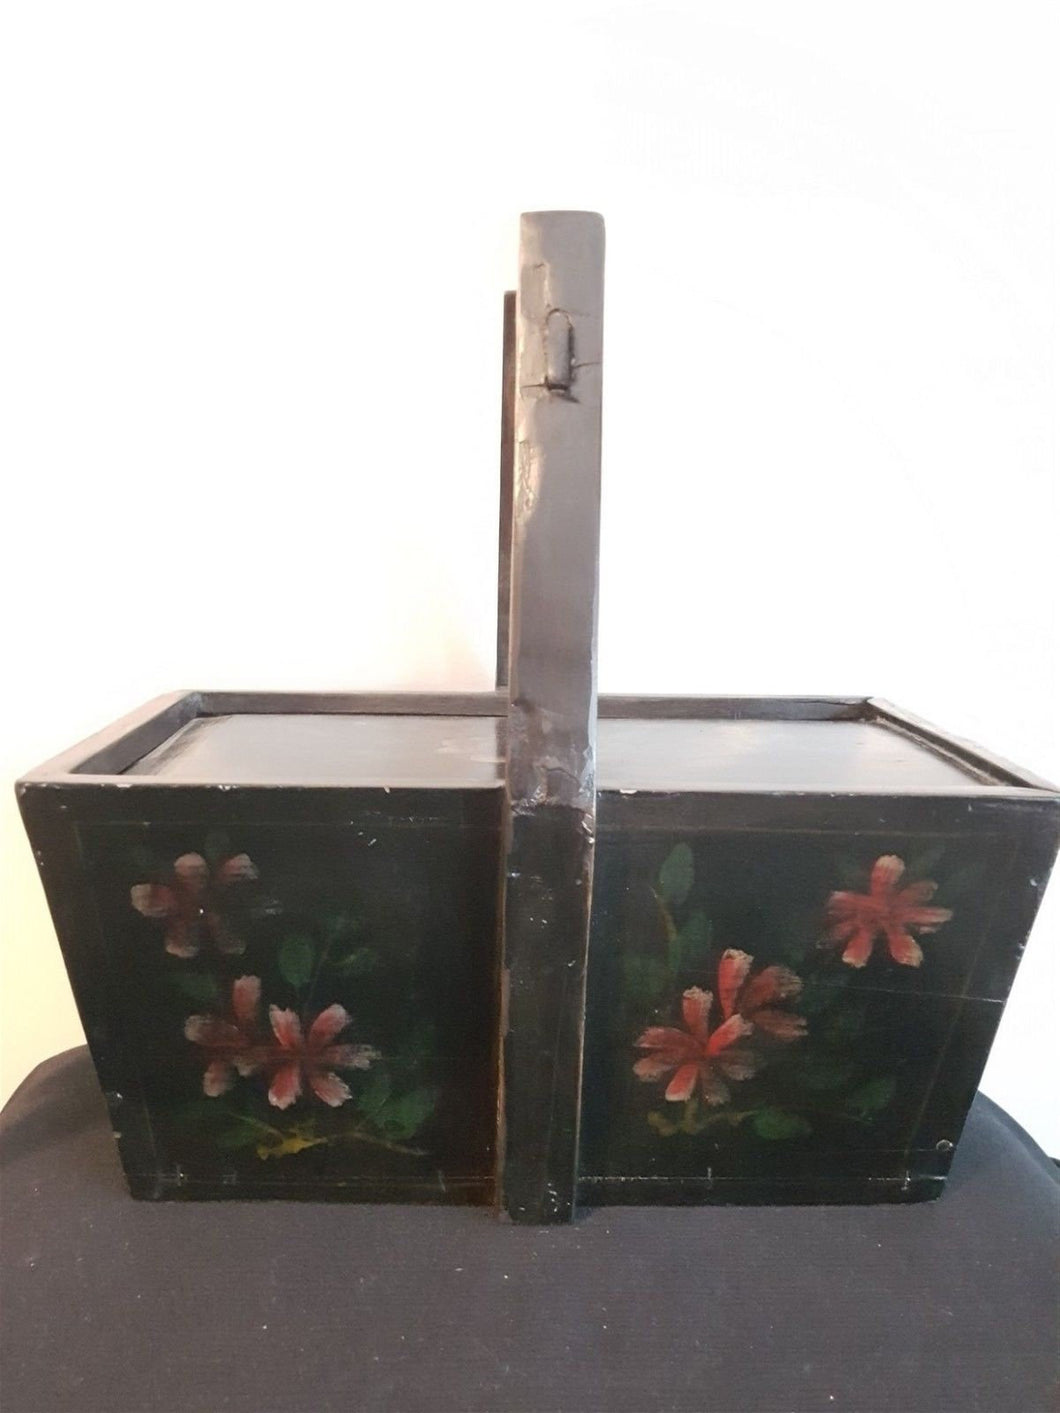 Antique Dutch Wooden Box with Slide Top Lid and Wood Handle with Hand Painted Art Flowers 1800's Original